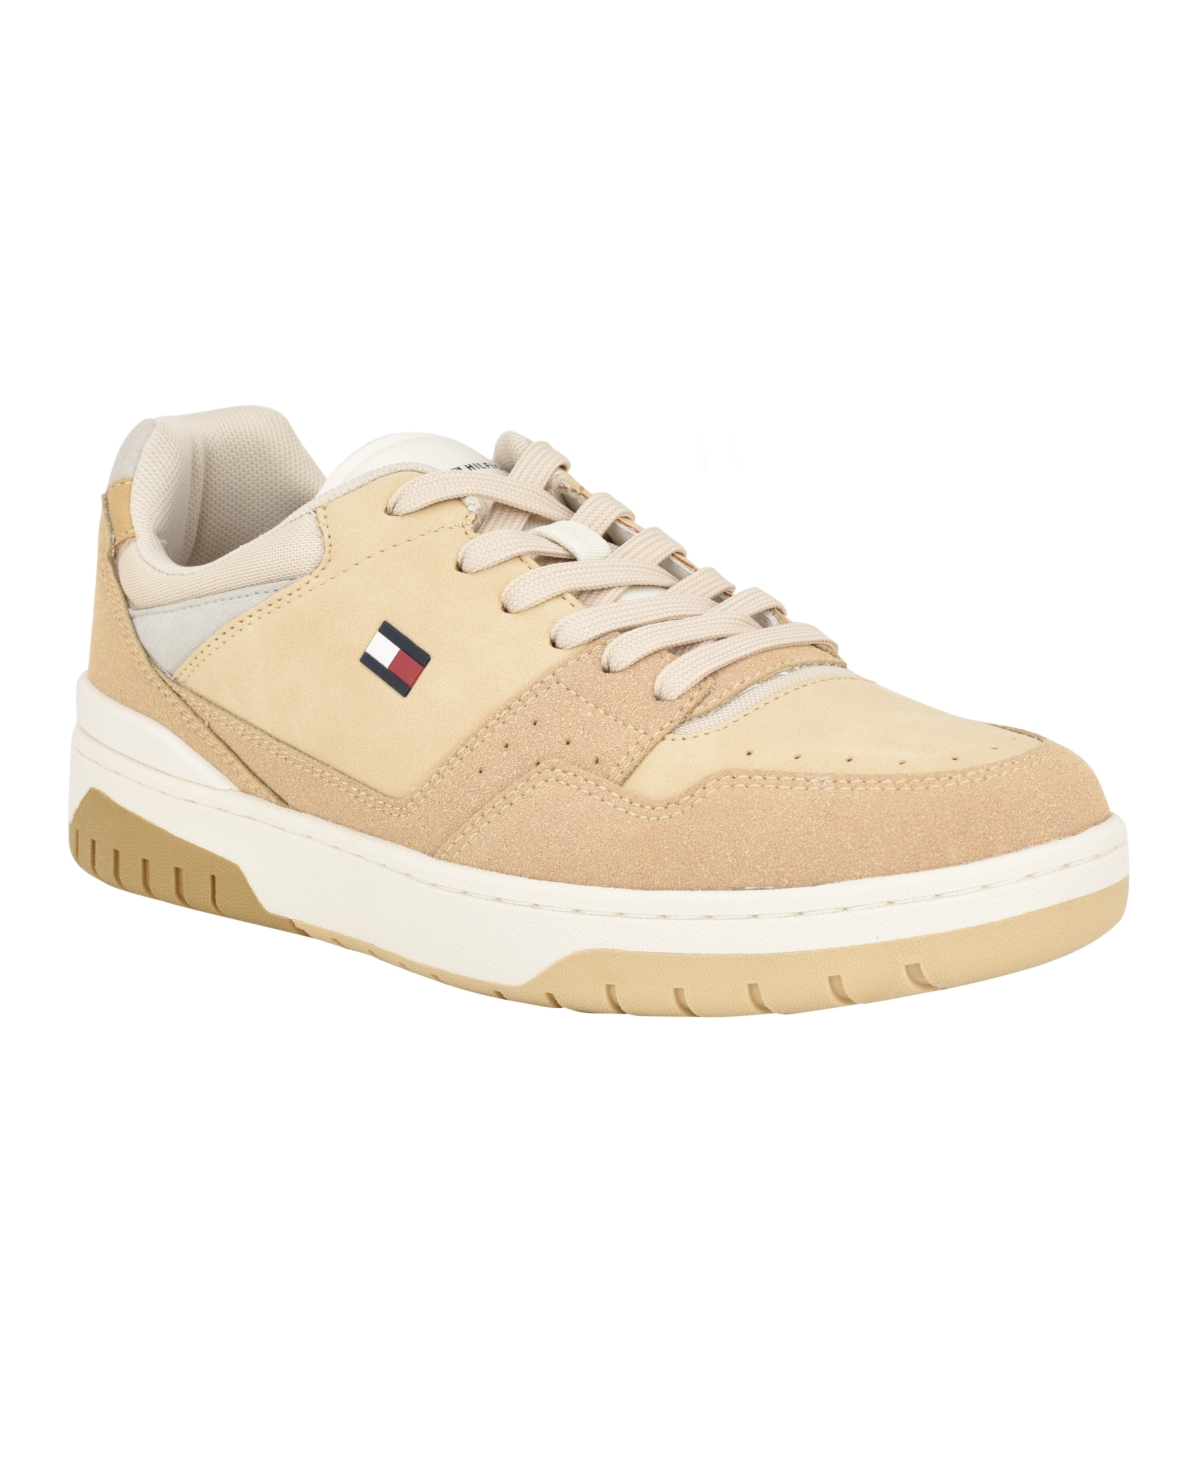 Tommy Hilfiger Men's Nashon Lace Up Fashion Sneakers In Medium Natural Multi